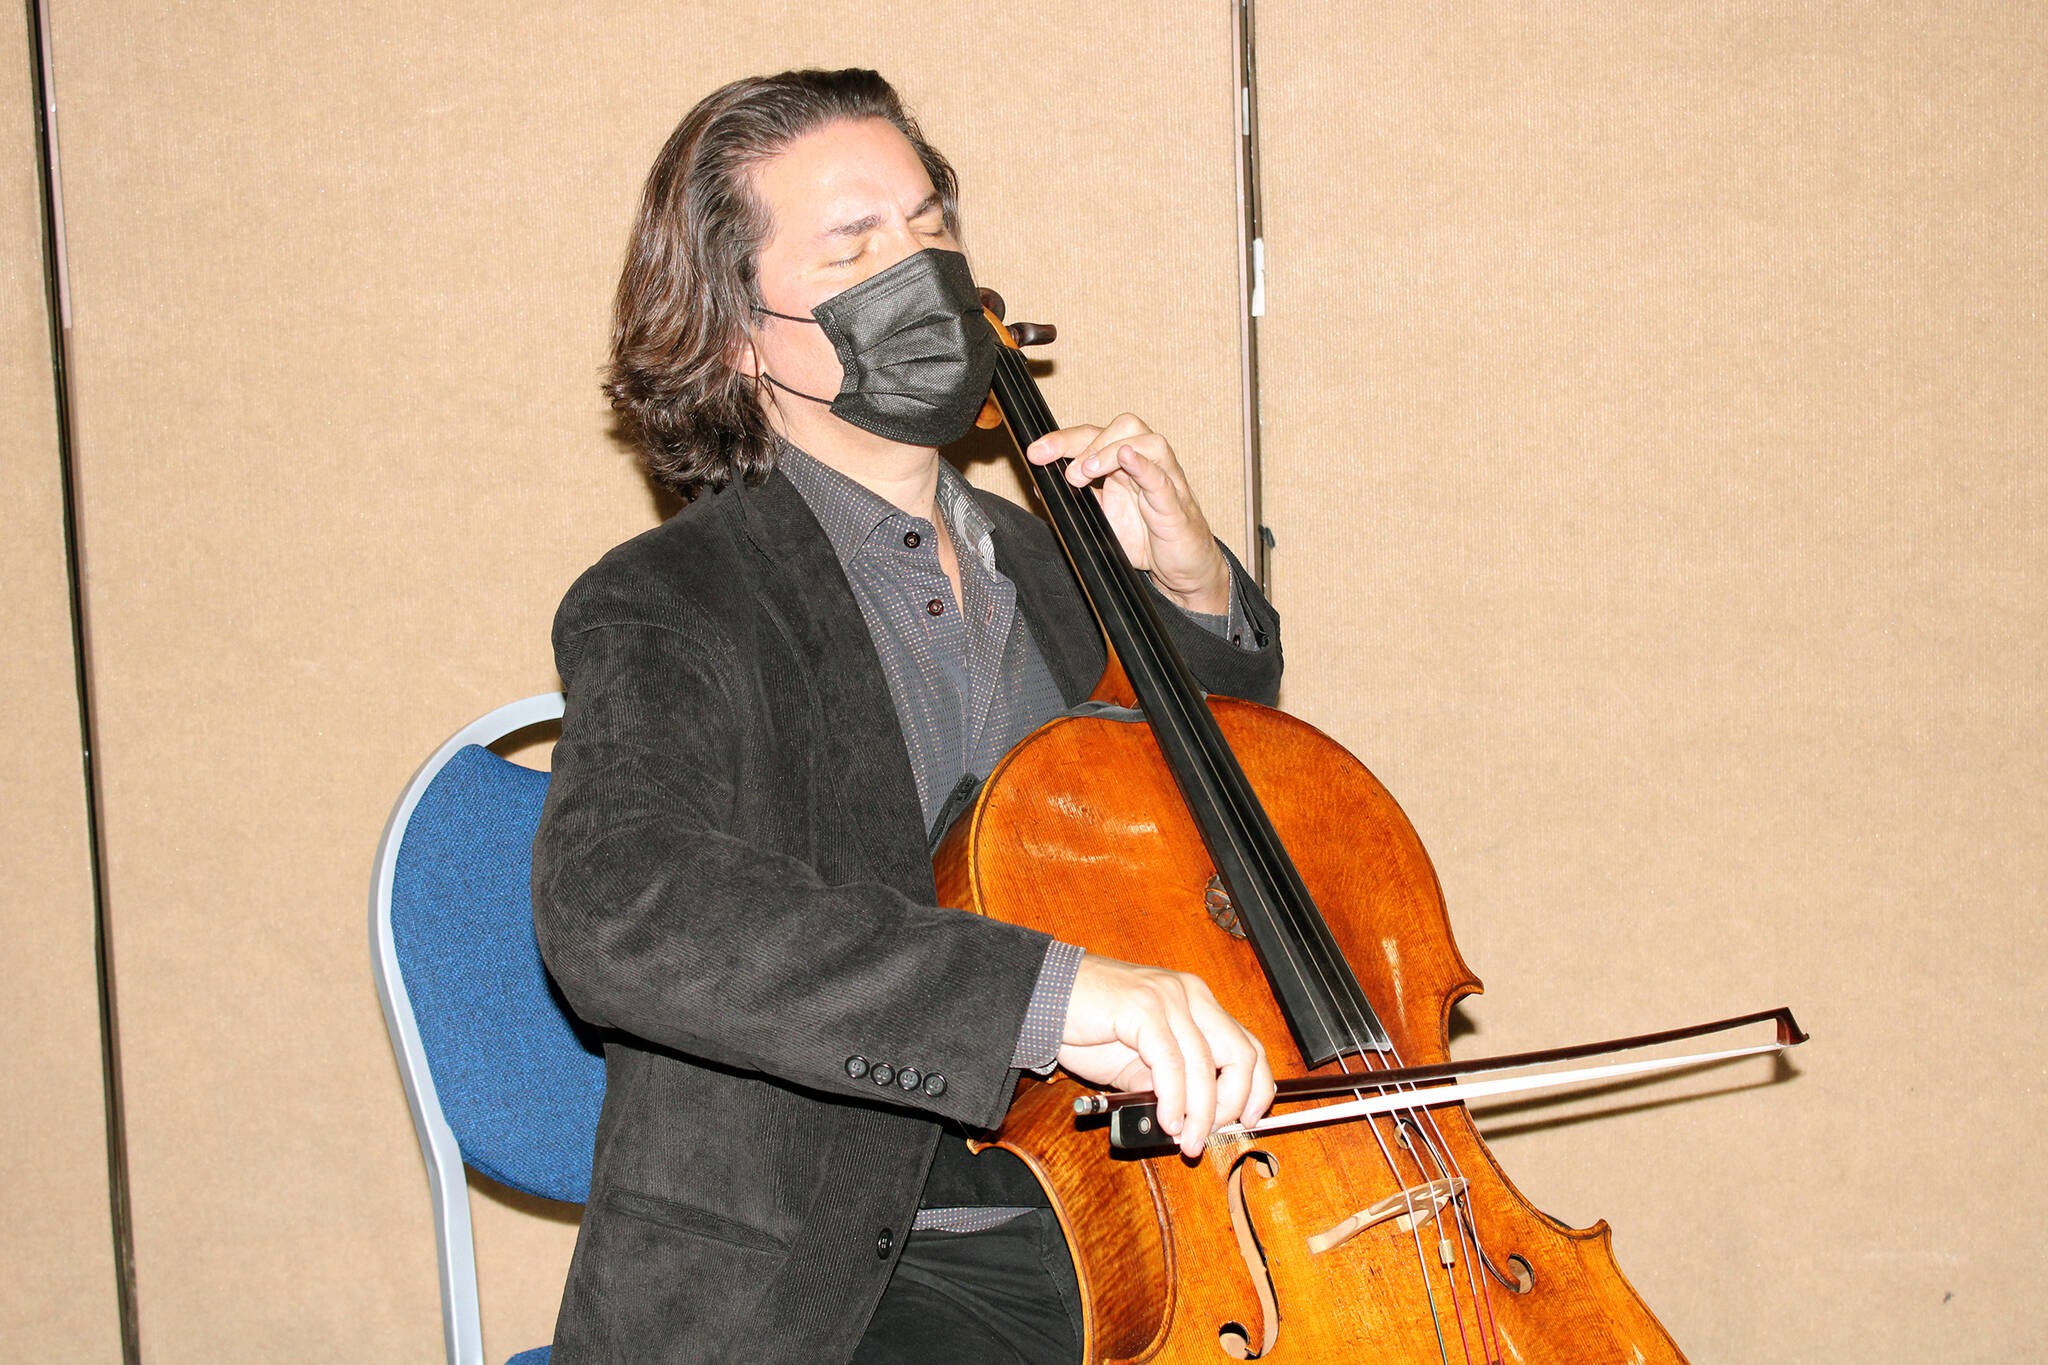 Grammy-award-winning cellist Zuill Bailey performed all six Bach suites as people filed in for a second COVID-19 vaccine dose at Centennial Hall on April 3. He will return to Juneau later this month as part of the Fall Festival sponsored by Juneau Jazz & Classics. The live, in-person event will take place Sept. 29 through Oct. 2, at the Juneau Arts & Culture Center. (Dana Zigmund / Juneau Empire File)